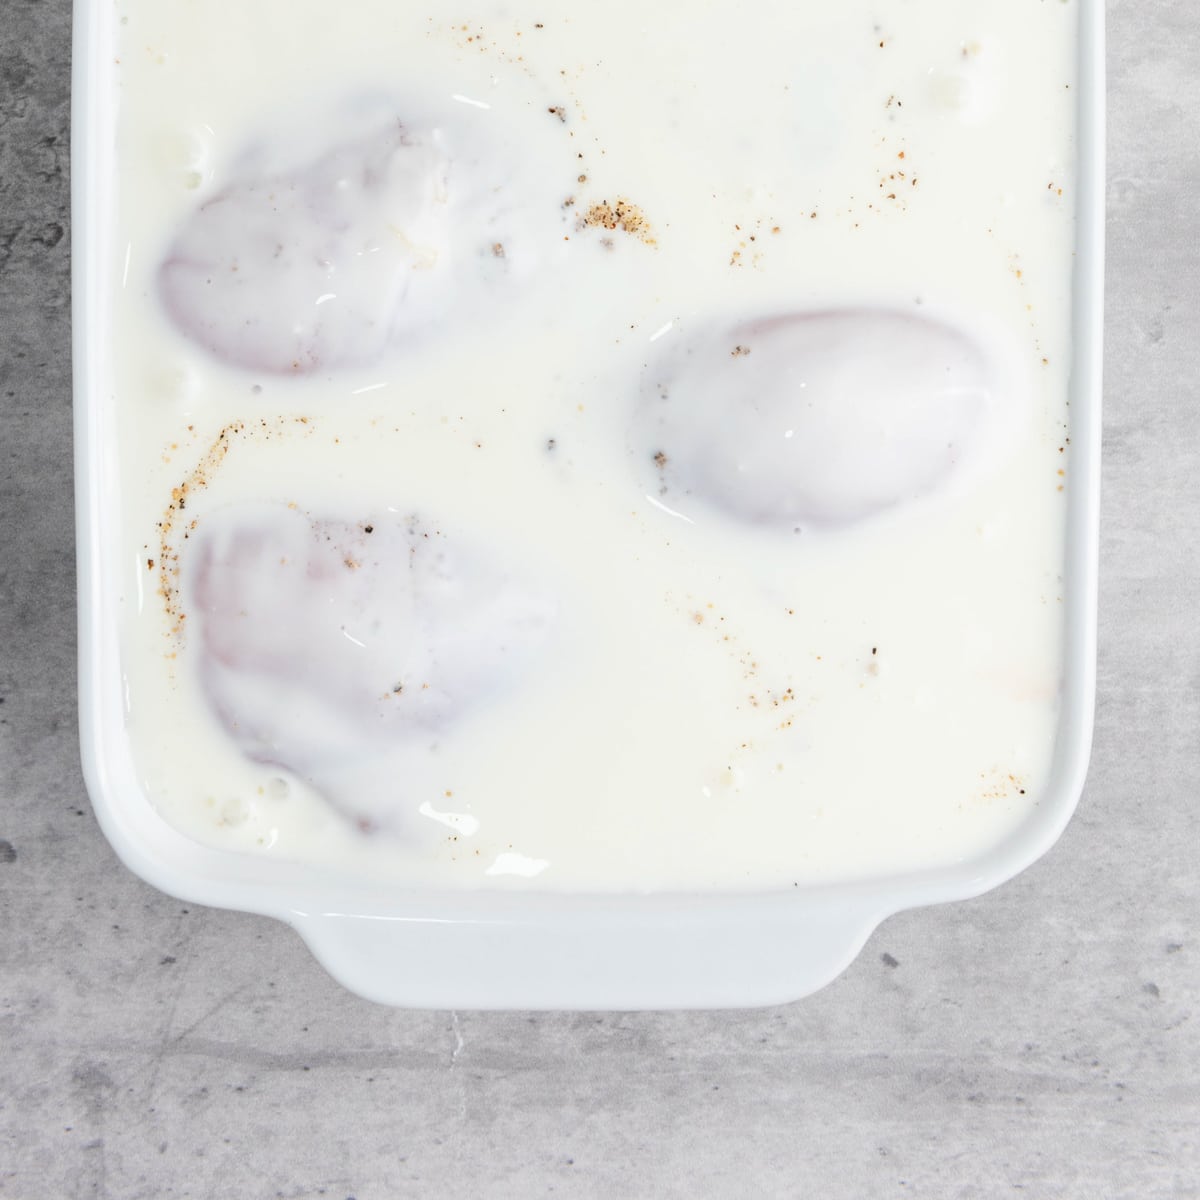 Chicken drumsticks in shallow dish covered with buttermilk.